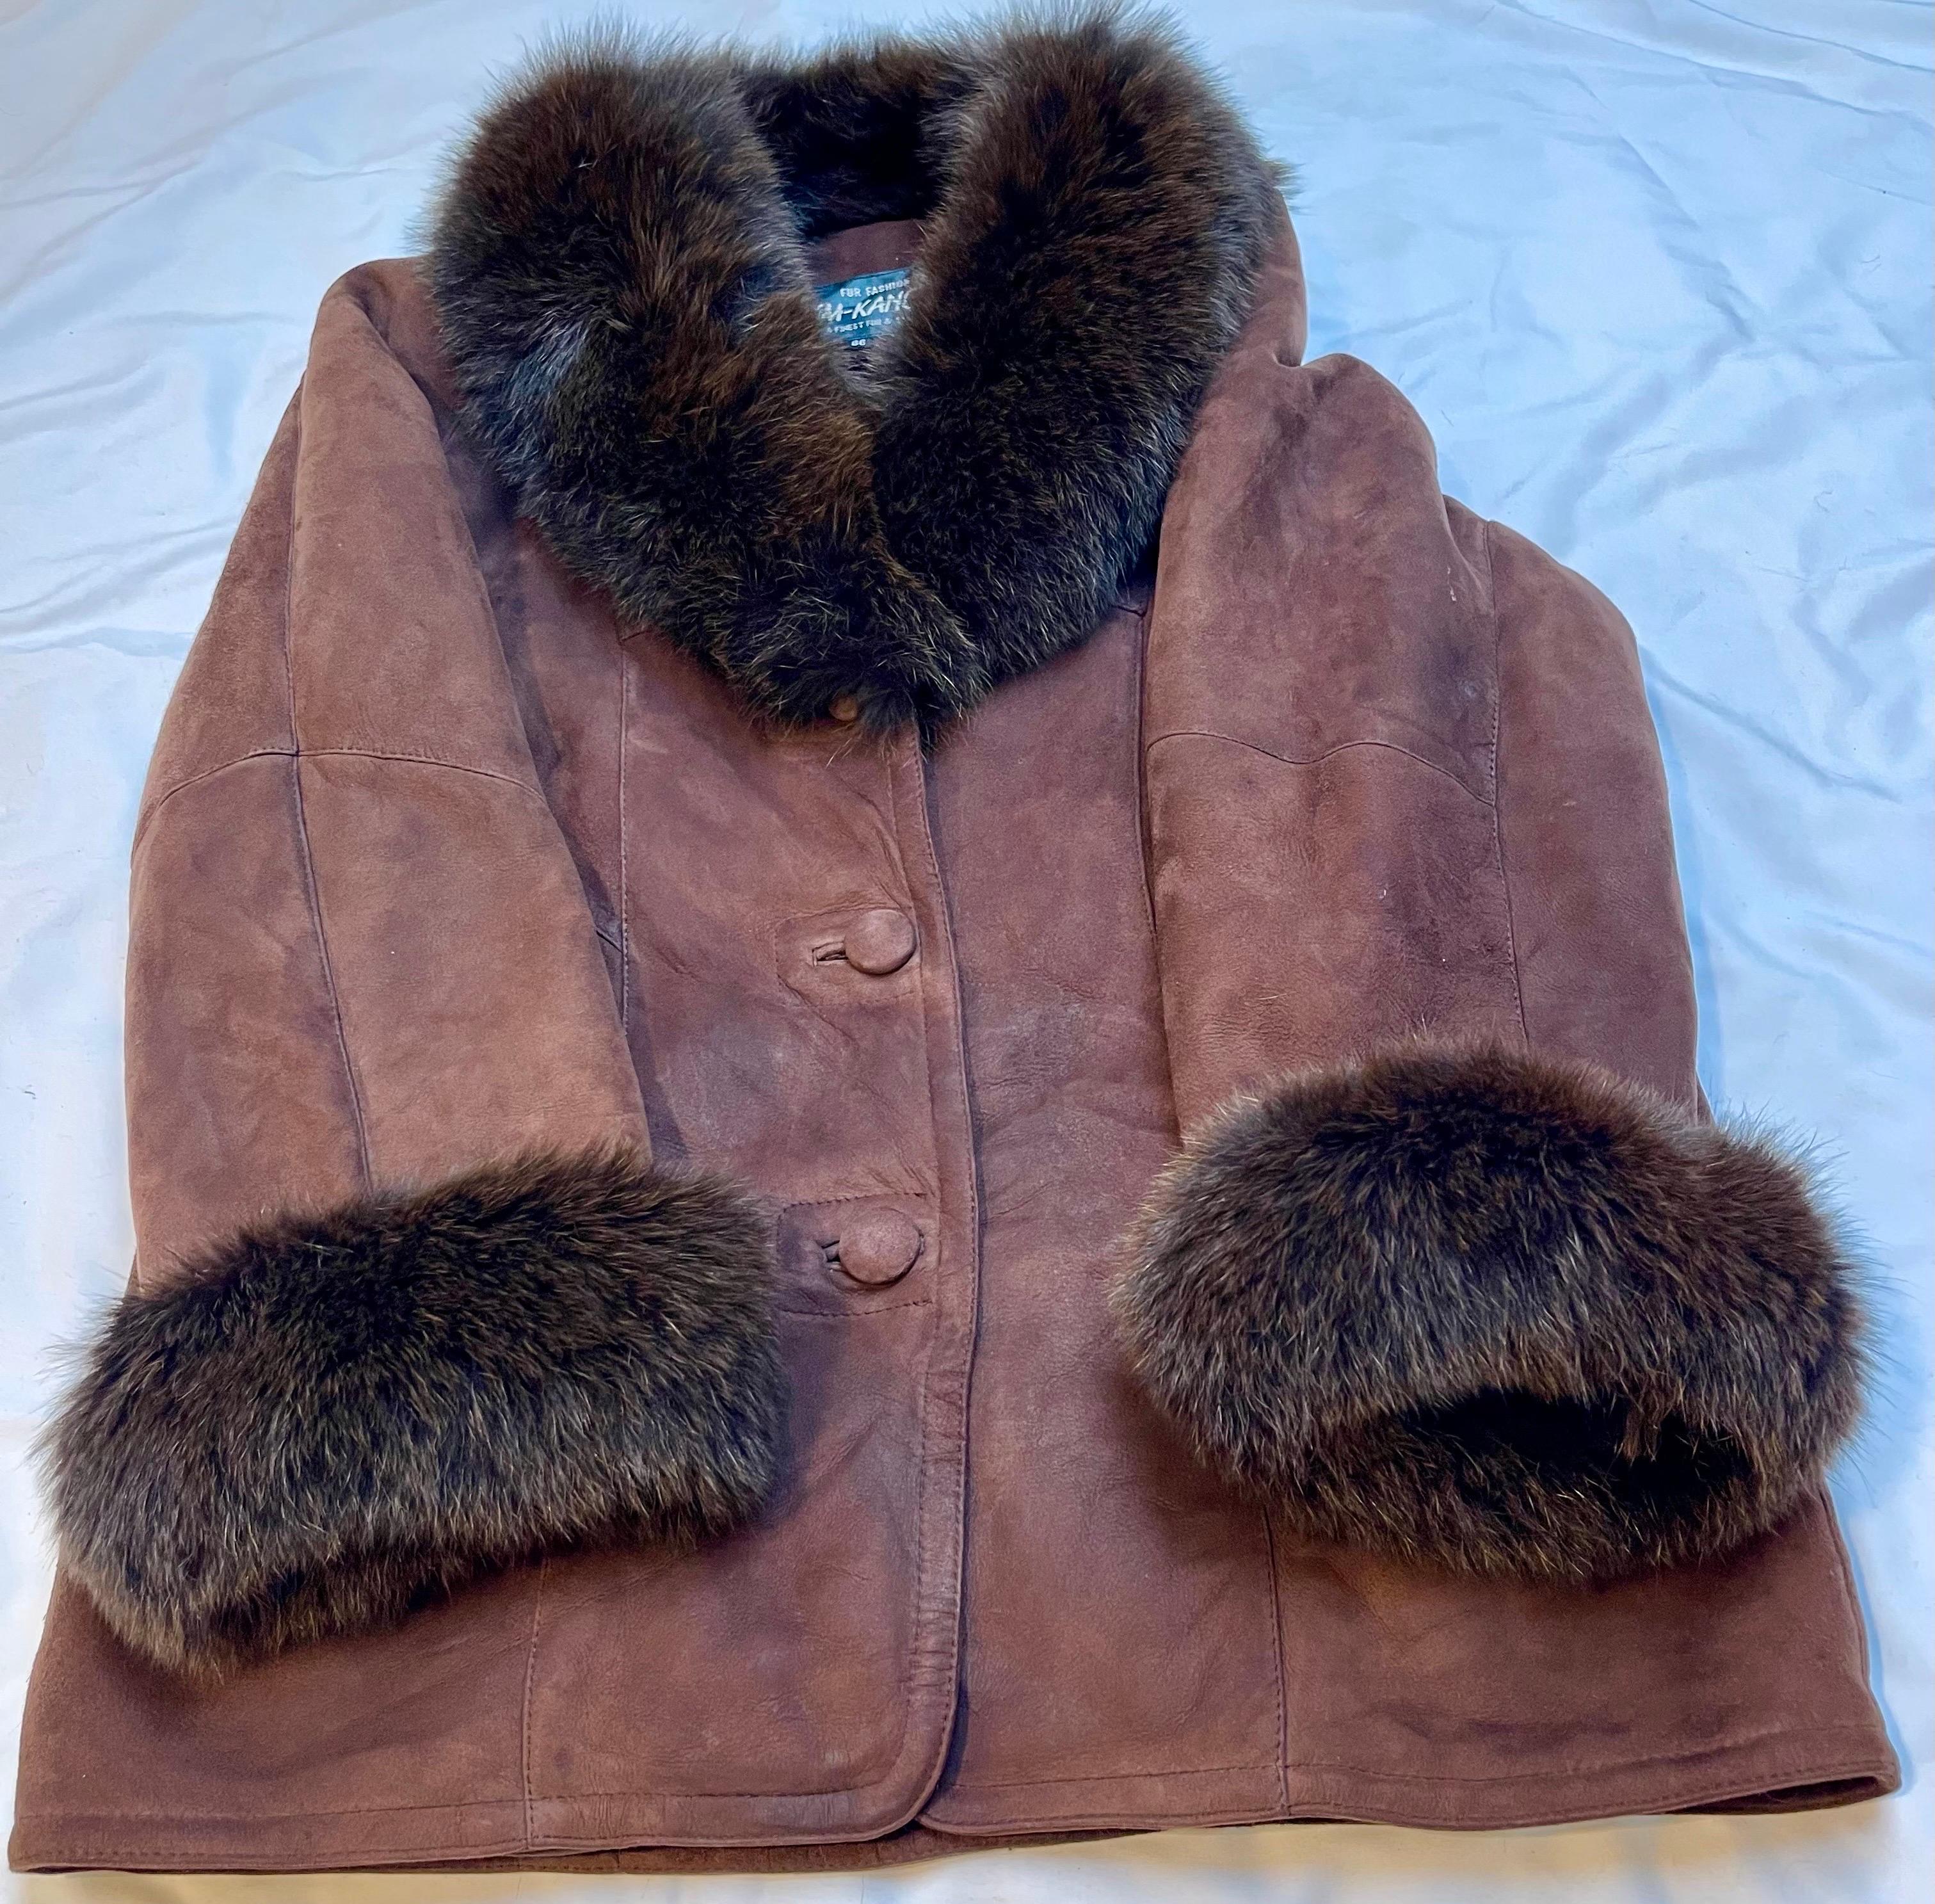  Winter ·  Genuine Fur · Genuine Leather · Shearling · Casual · Bomber, Real Fur
Super-insulating extra fine quality 
almost new ! super excellent condition
Tag Reads 
World's Finest Fur and Skin
Size 66
27 inch long 
21 Inch wide at the